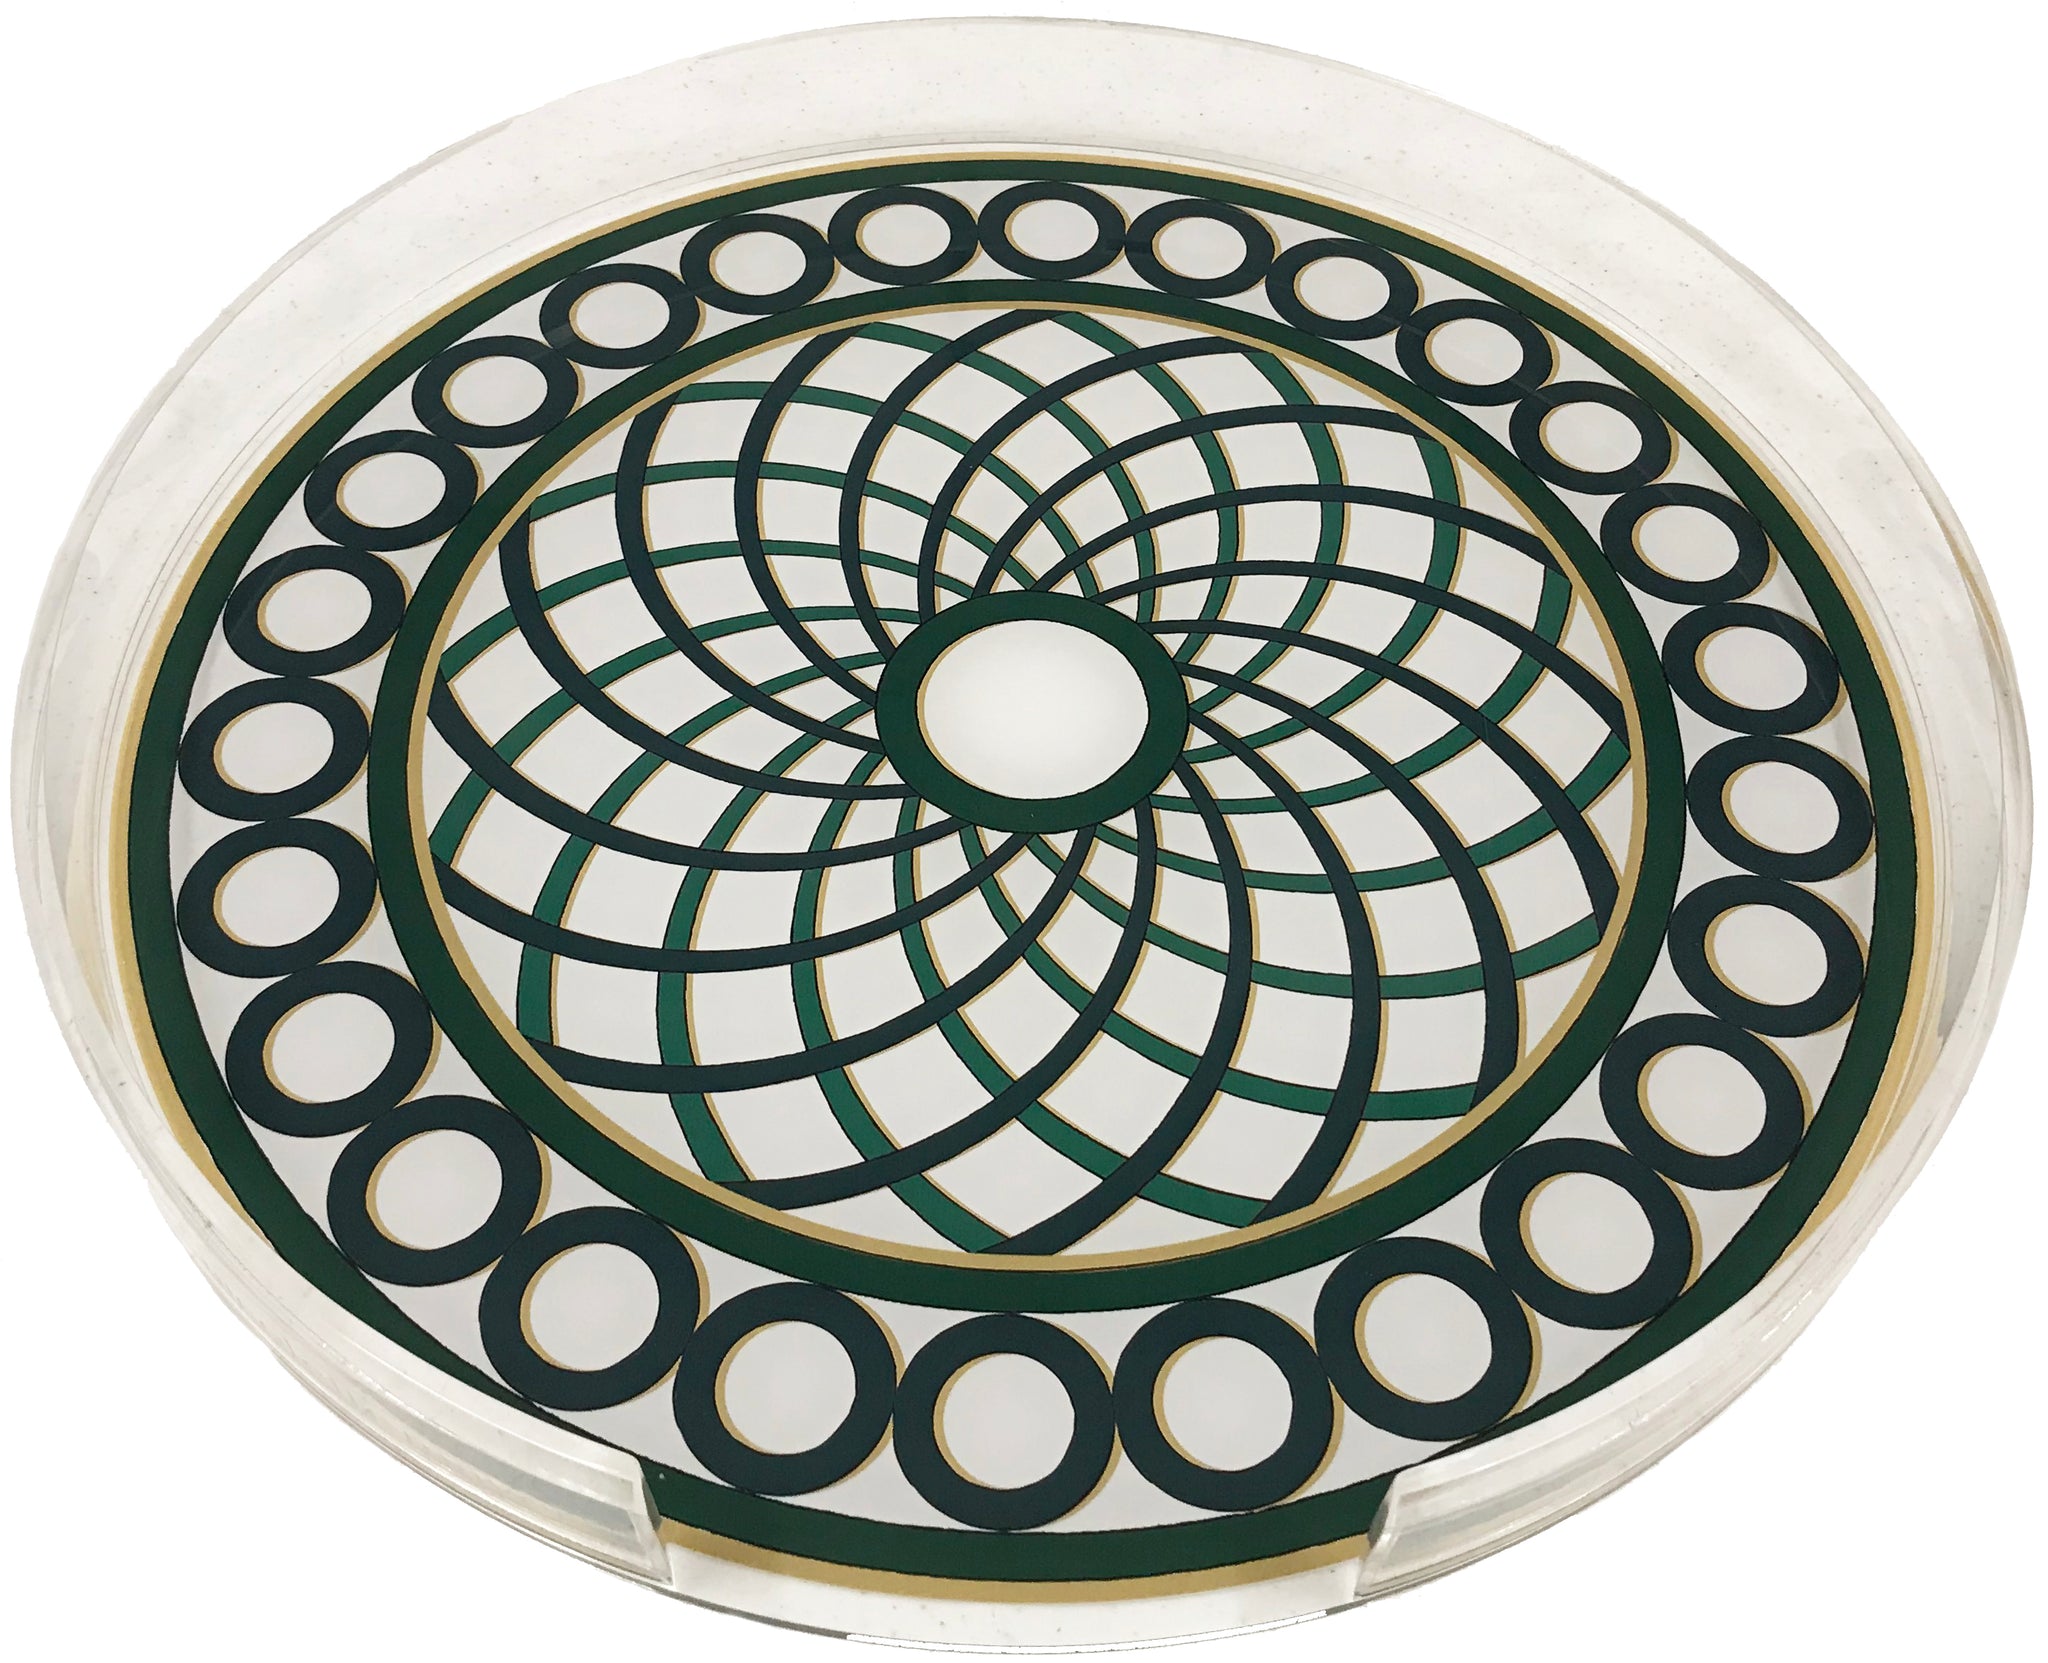 Timothy Corrigan Treillage Green Acrylic Round Tray for Placemats or Decorative Use, 16"